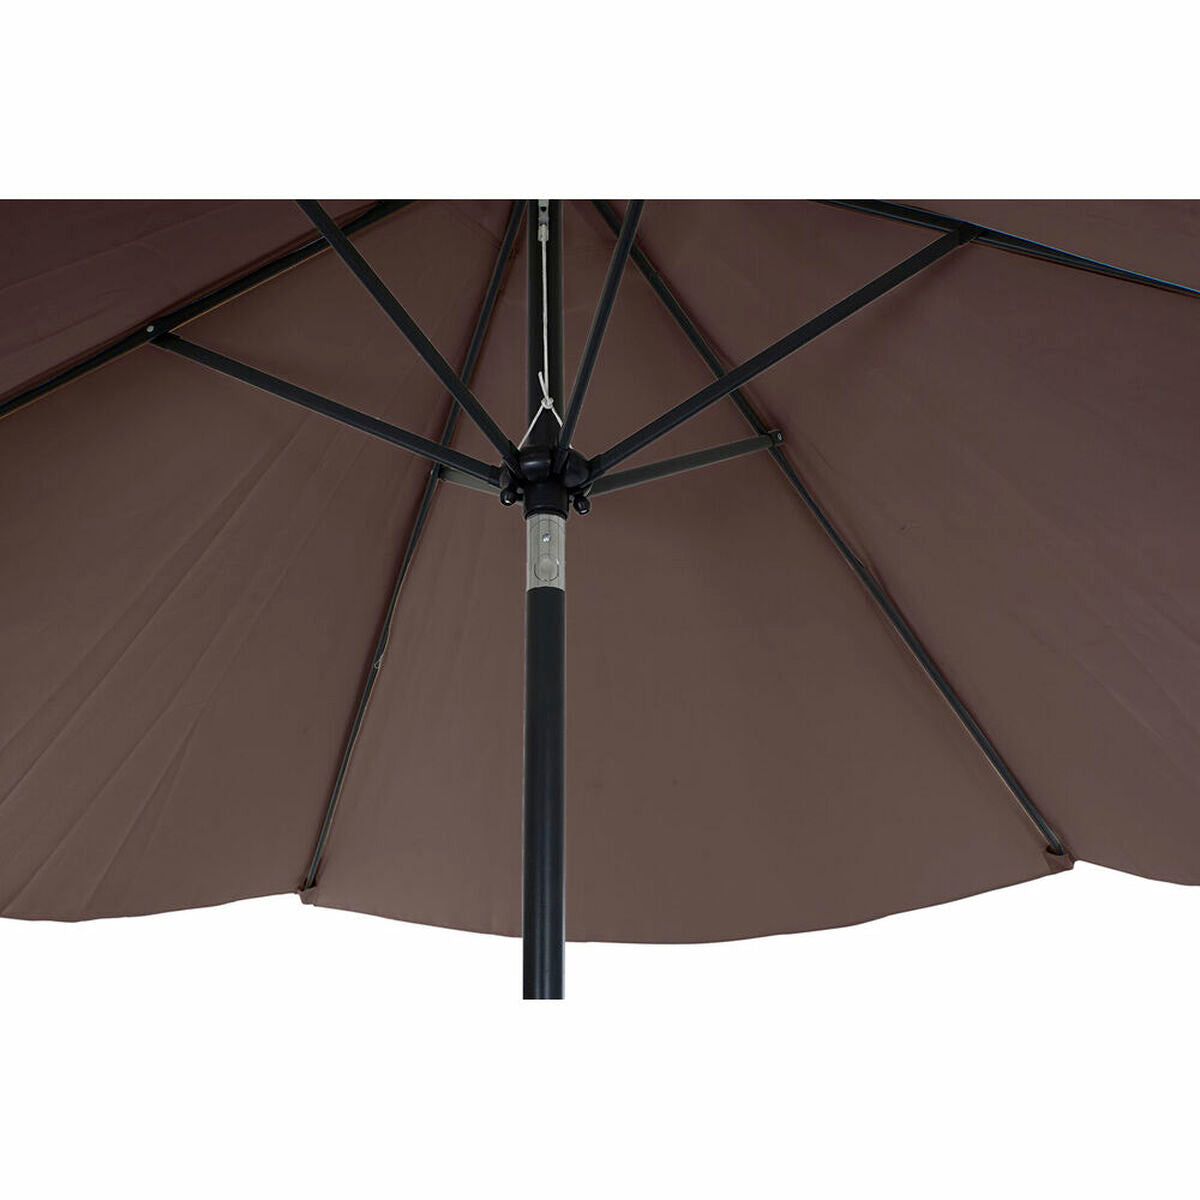 Sunshade DKD Home Decor Brown Black Polyester Steel (300 x 300 x 250